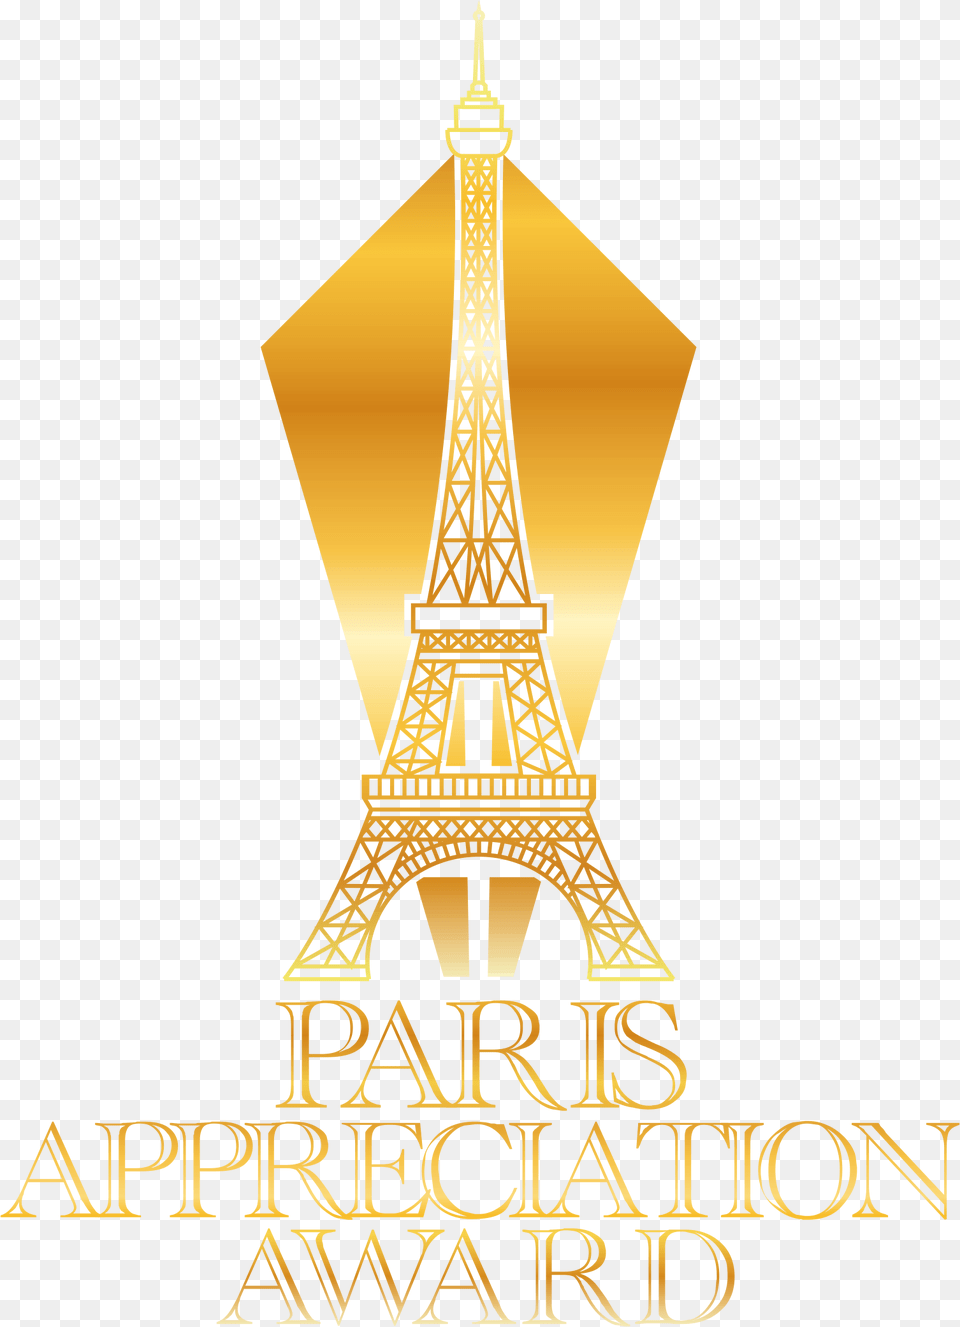 Paris Appreciation Awards On Top Of The Eiffel Tower Graphic Design, Gold, Architecture, Building, Accessories Png Image